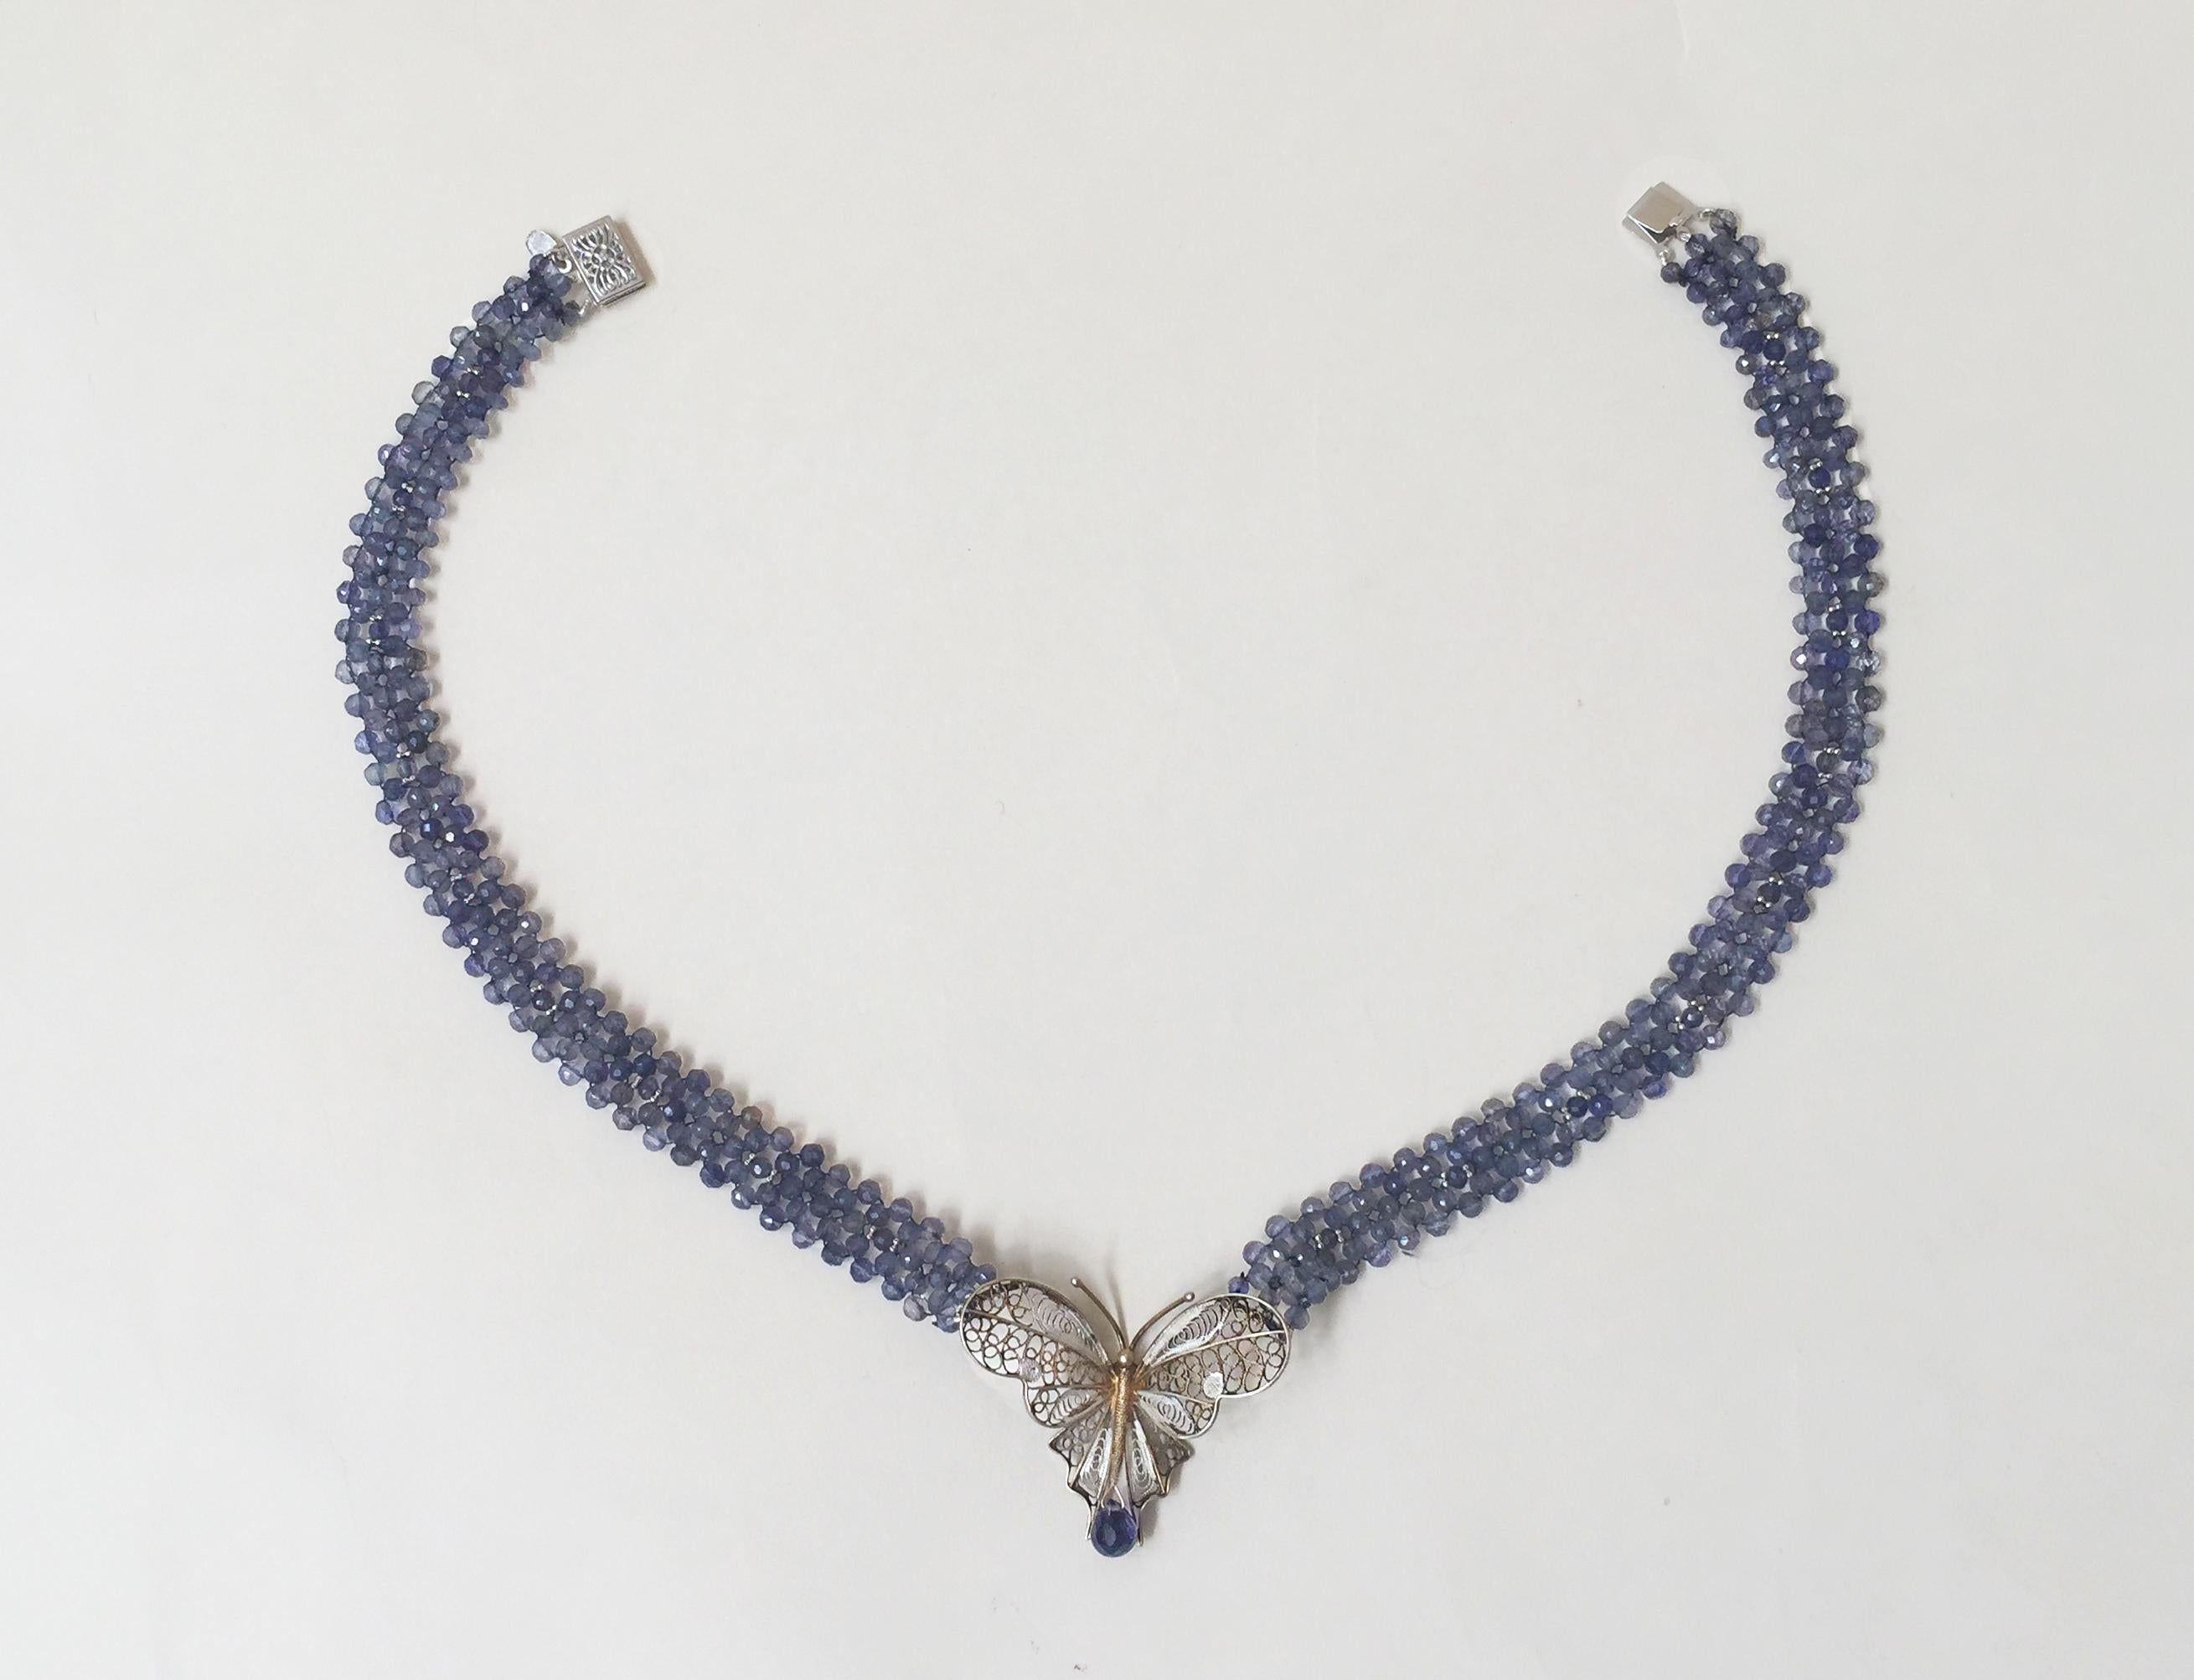 Artist Marina J. Vintage Butterfly on Woven Iolite Beaded Necklace with 14k White Gold